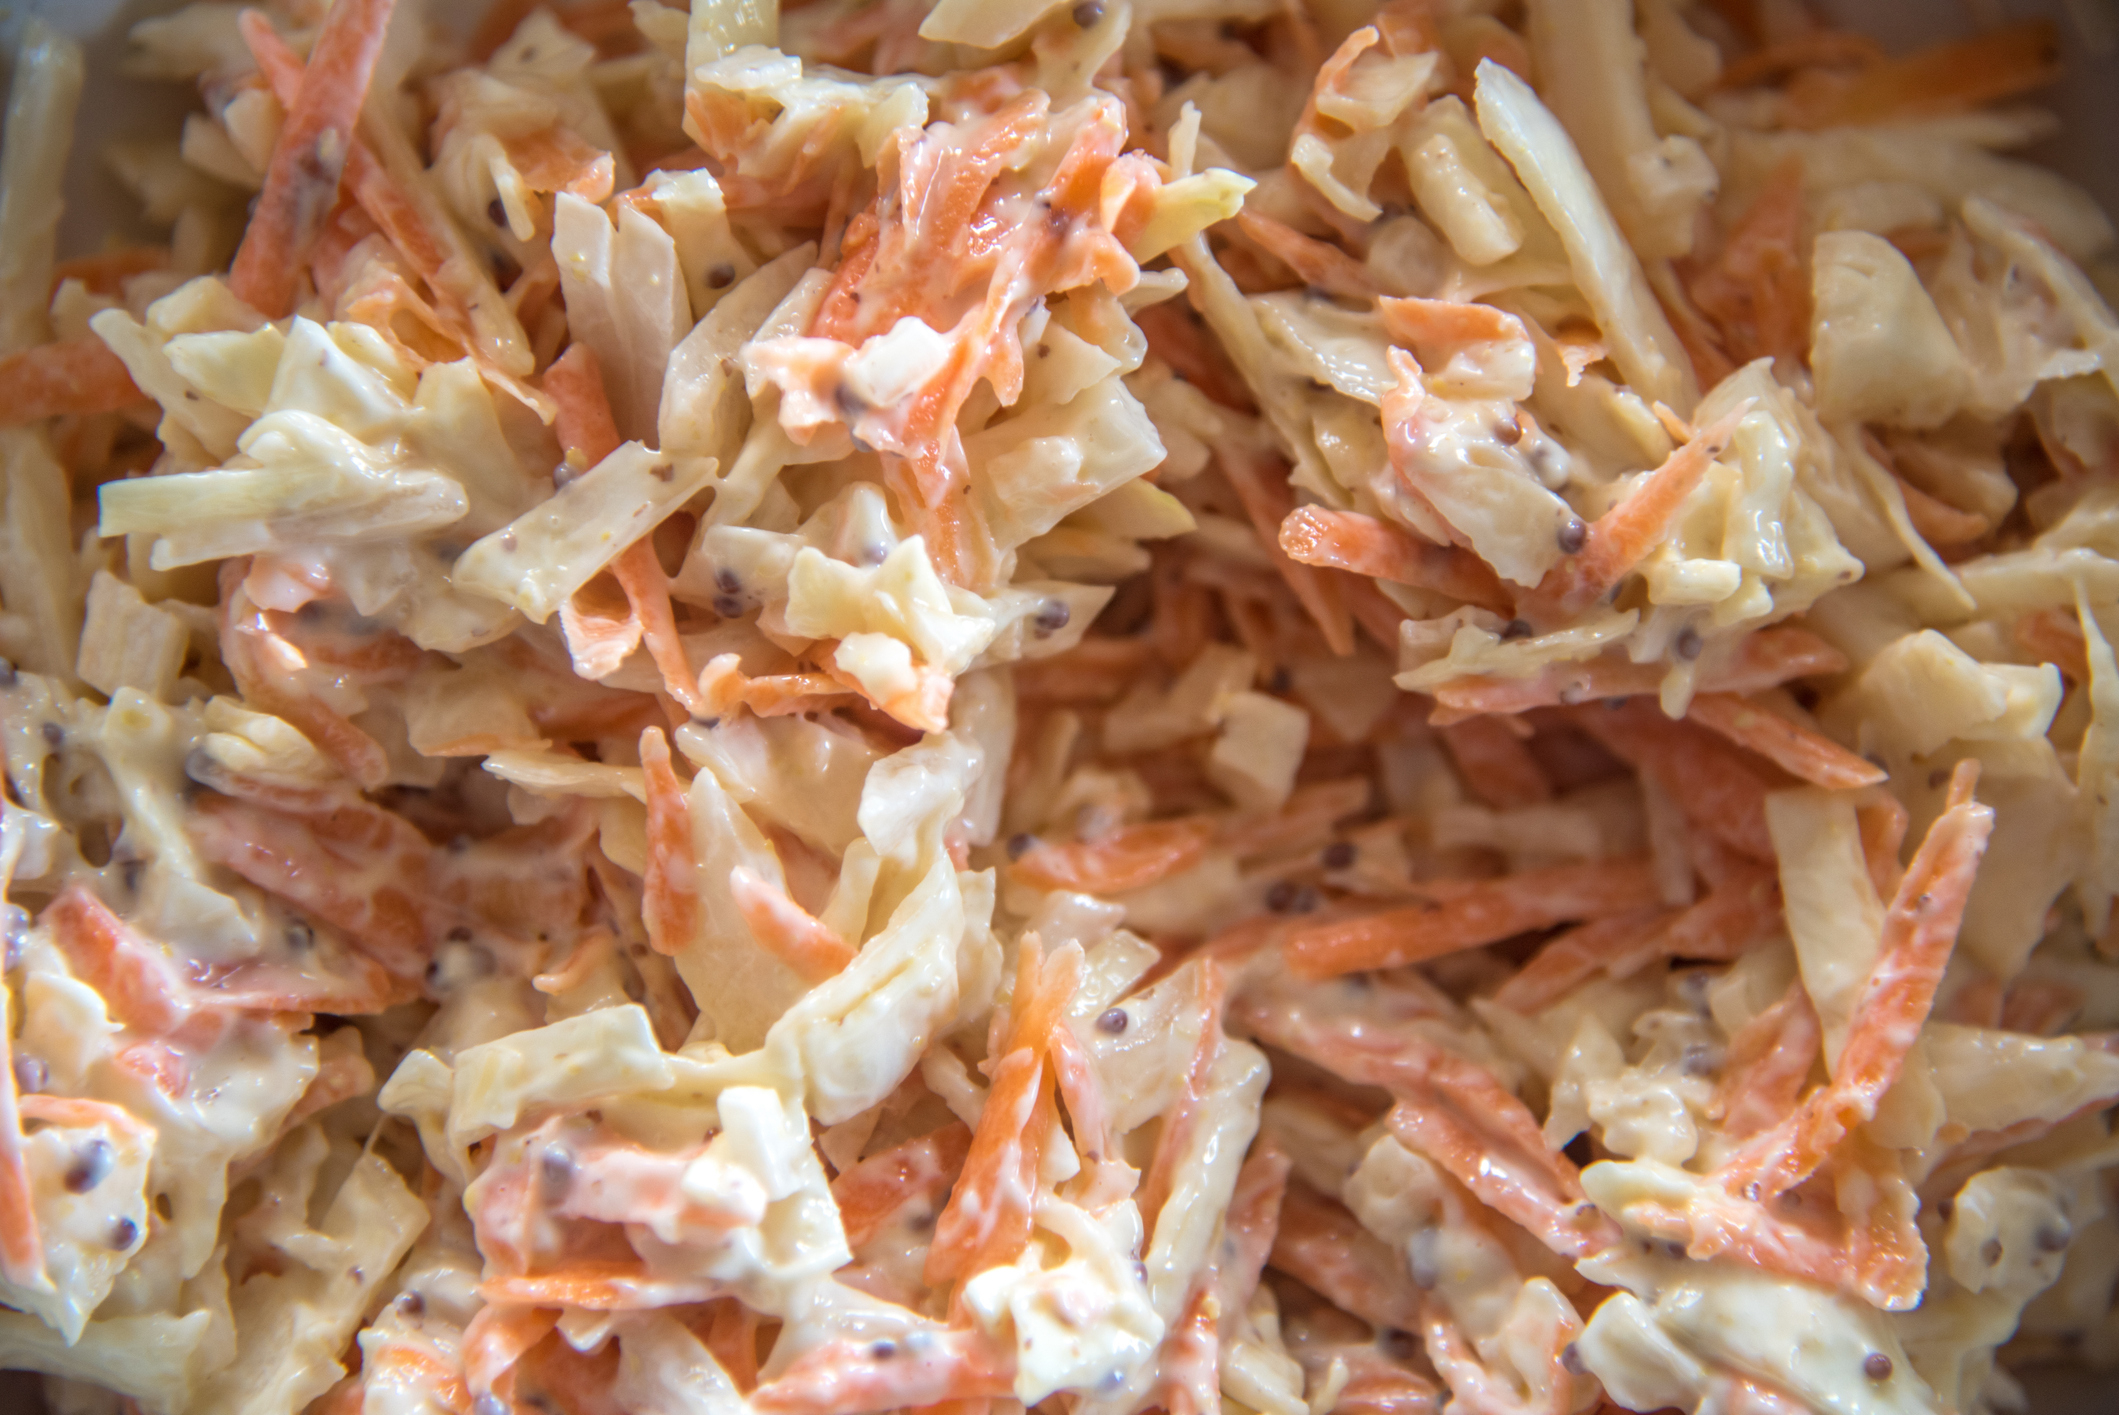 Close-up of coleslaw with shredded carrots and cabbage dressed in mayonnaise